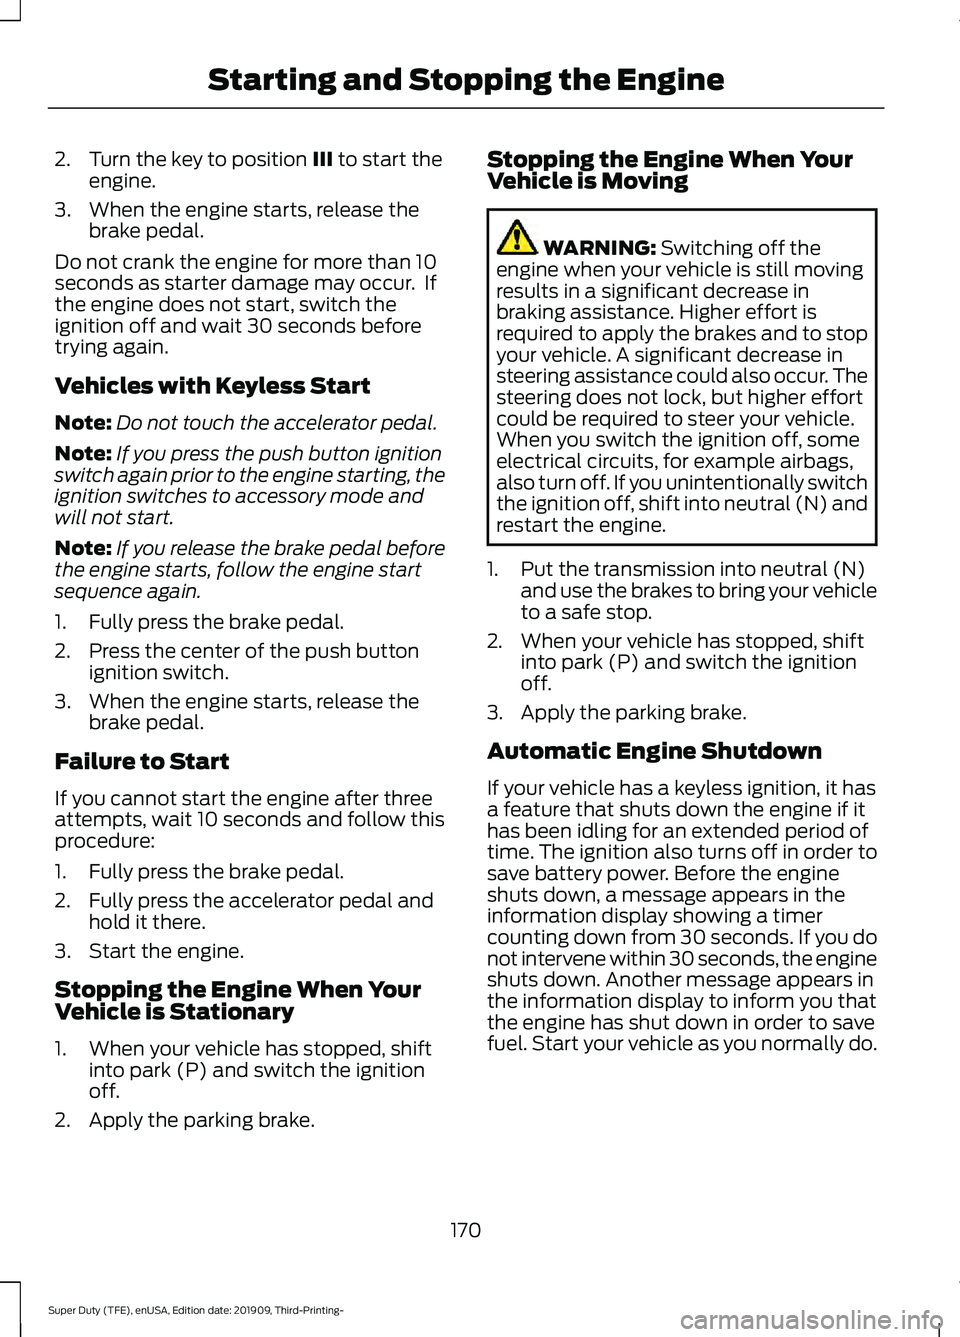 FORD F-550 2020  Owners Manual 2. Turn the key to position III to start the
engine.
3. When the engine starts, release the brake pedal.
Do not crank the engine for more than 10
seconds as starter damage may occur.  If
the engine do